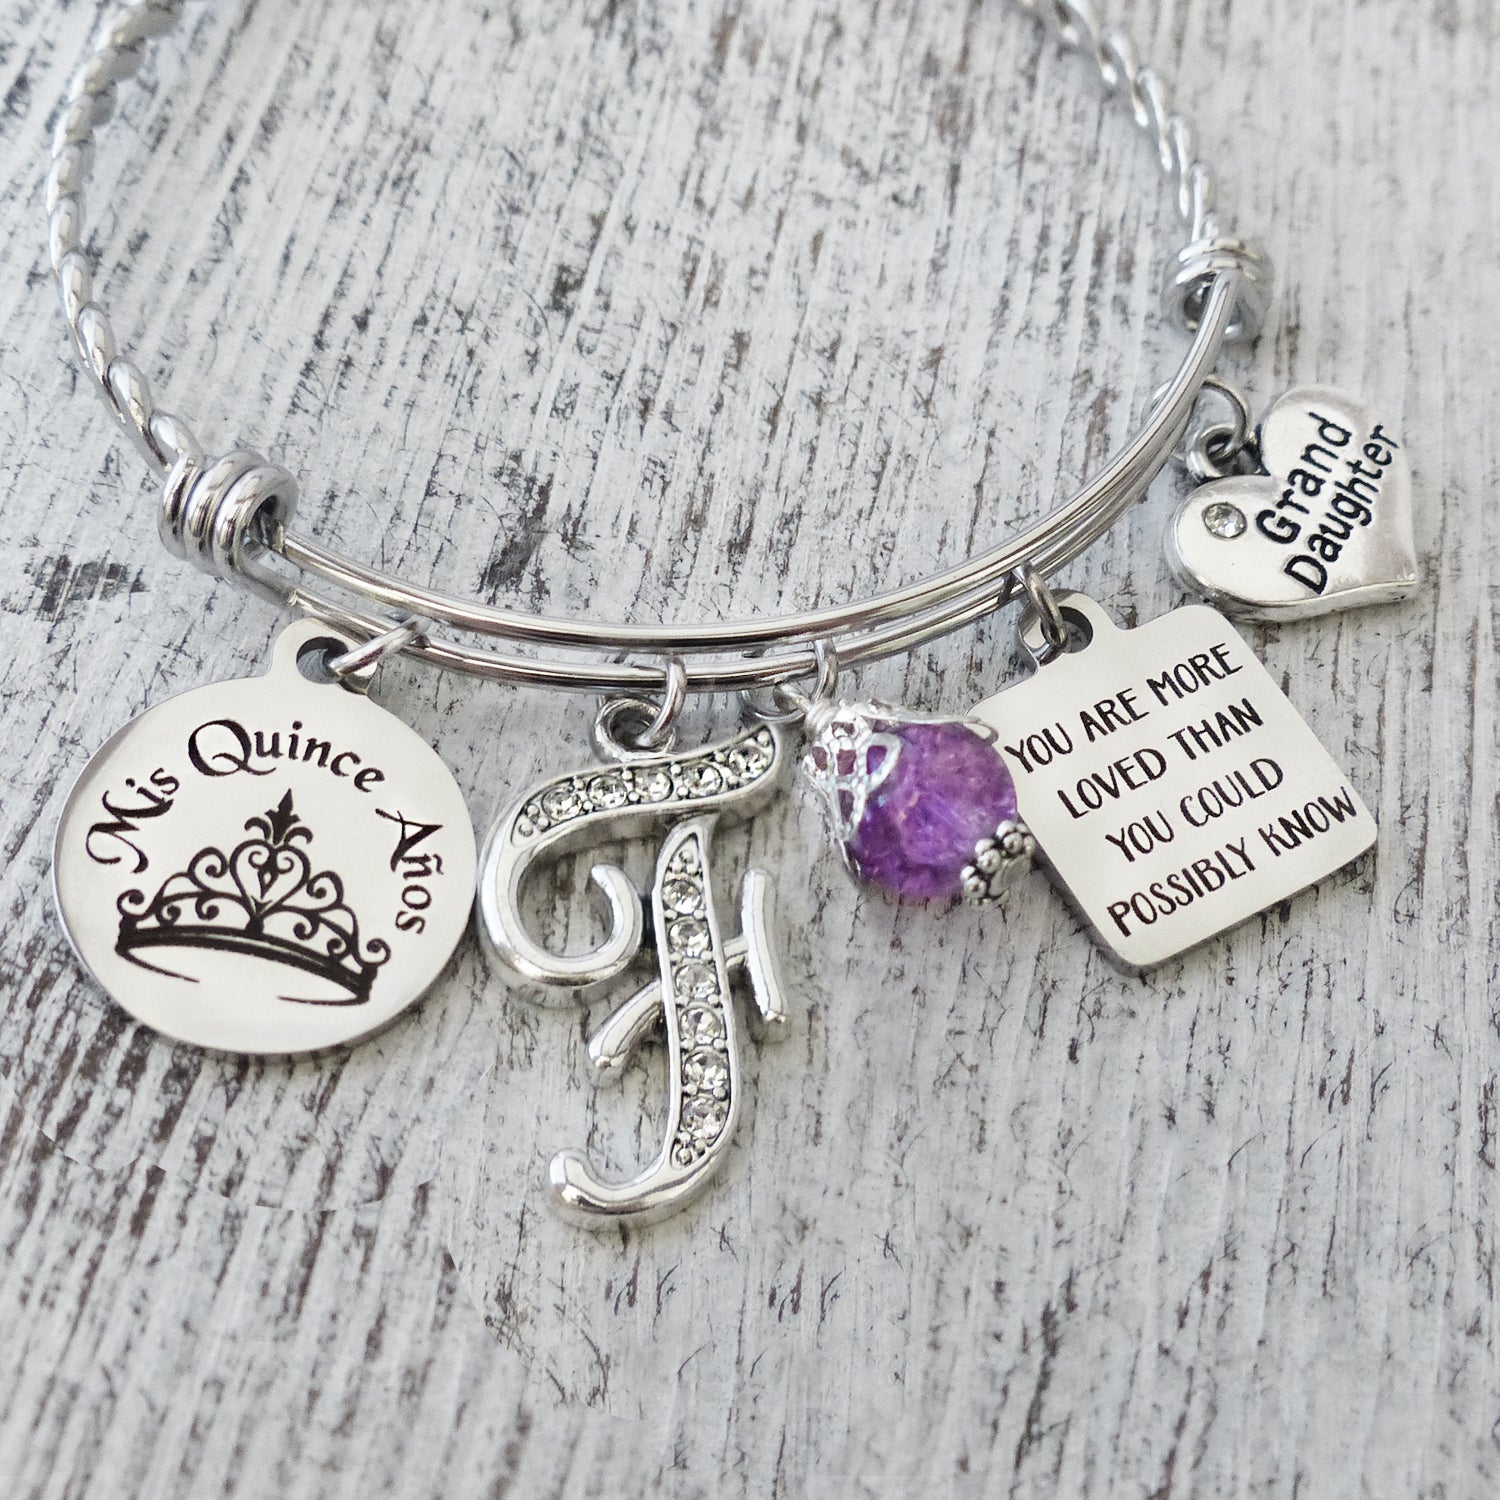 Quinceanera Bracelet, 15th Birthday Gift, You are more loved than you could possibly know, Personalized 15th Jewelry- Mis Quince Anos